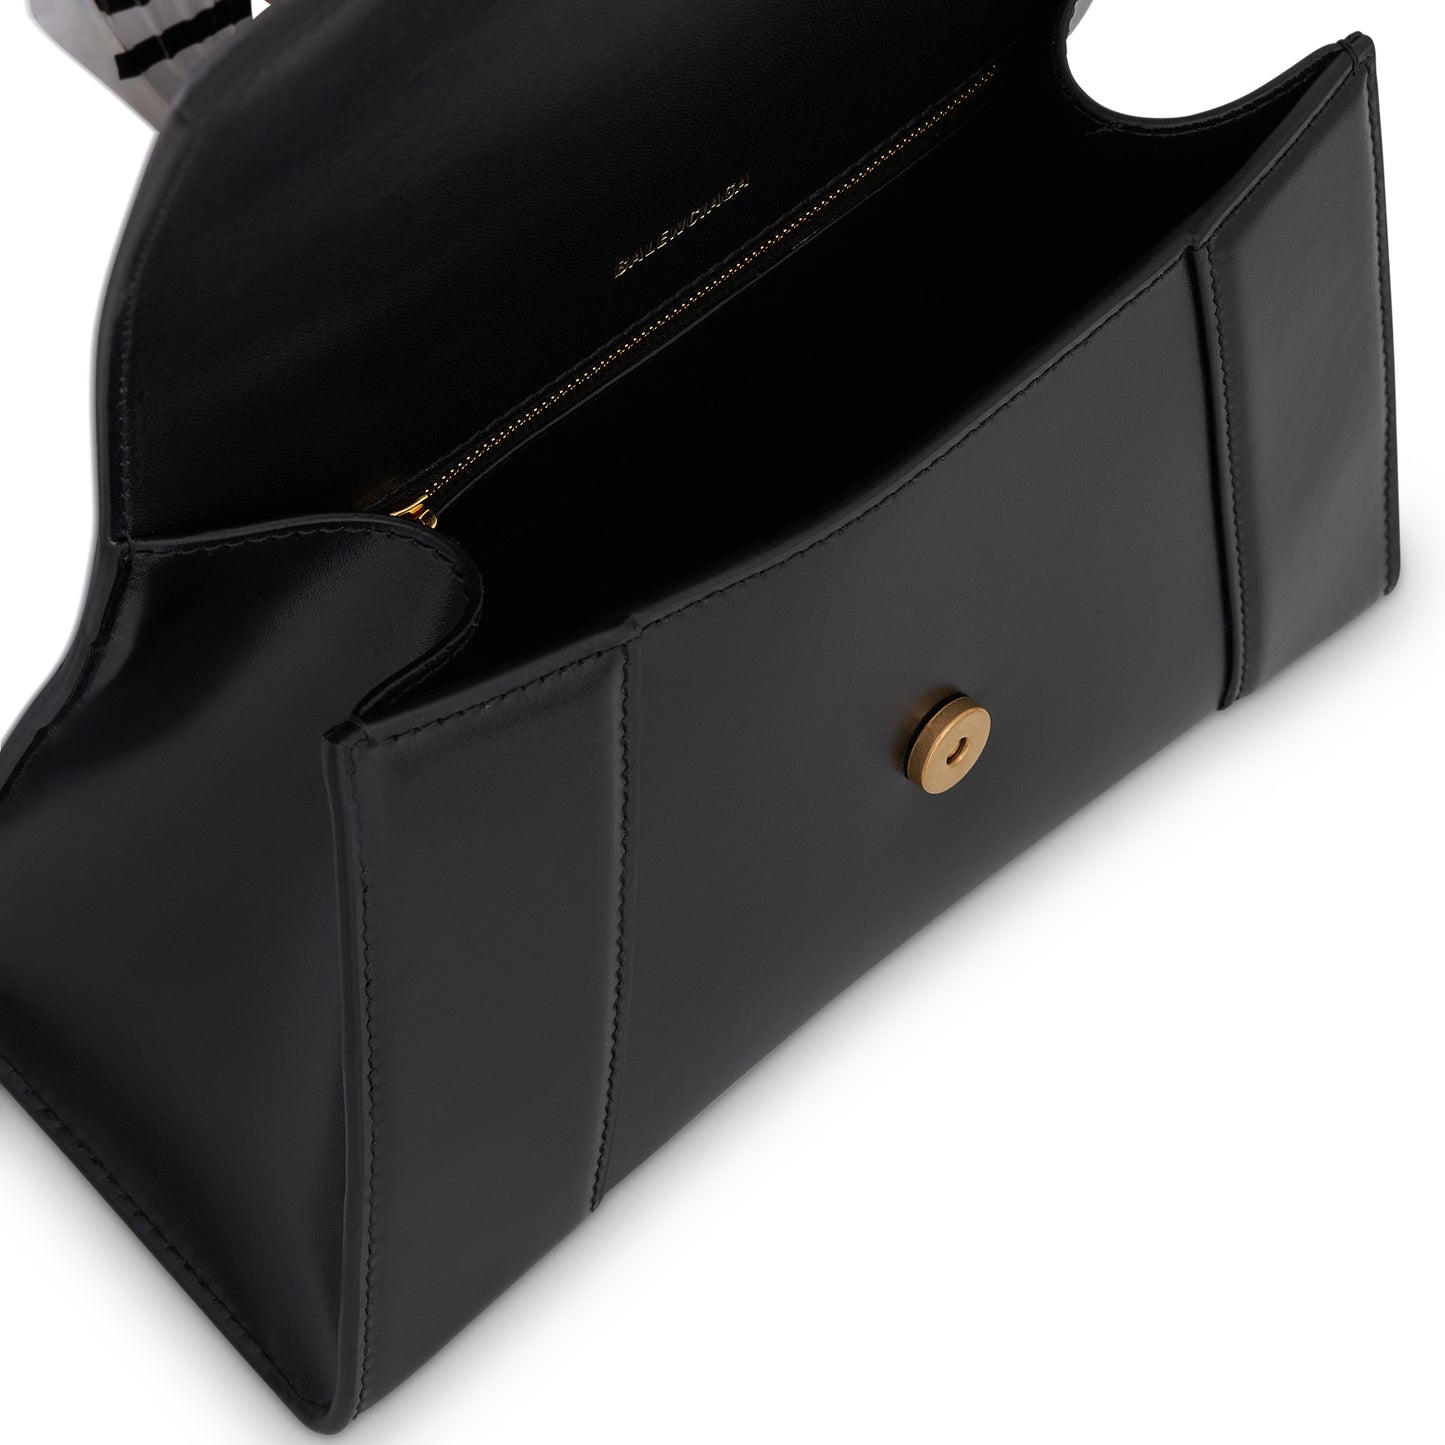 Hourglass Small Handbag in Box Calfskin in Black with Gold Plaque